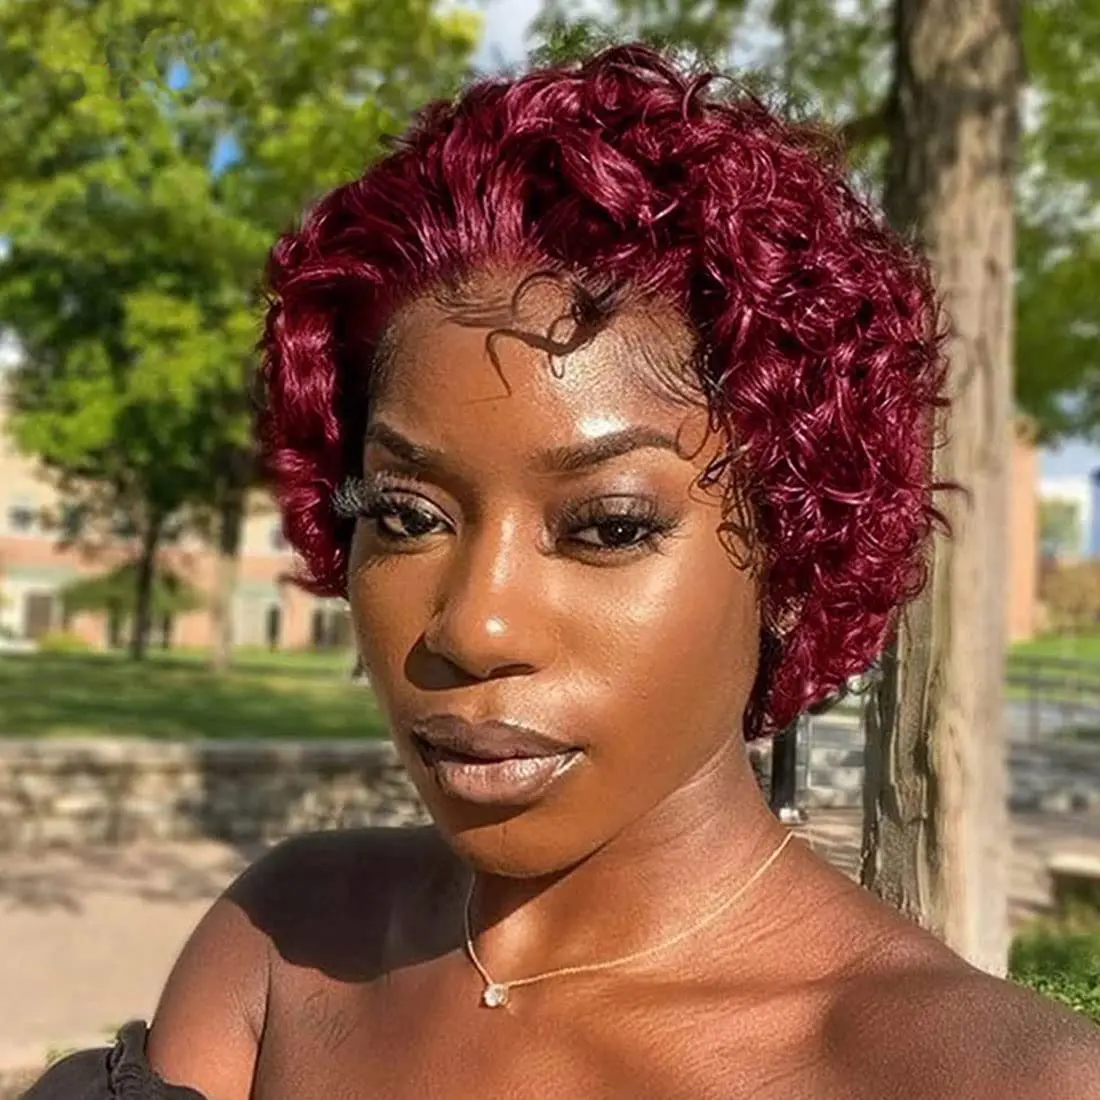 Lace Frontal Pixie Cut Human Hair Wigs Natural Color 13x1 Lace Frontal  Pixie Wig Lace Frontal Human Hair Wigs For Black Women - Buy 13x1 Lace  Frontal Pixie Wig,Lace Frontal Pixie Cut